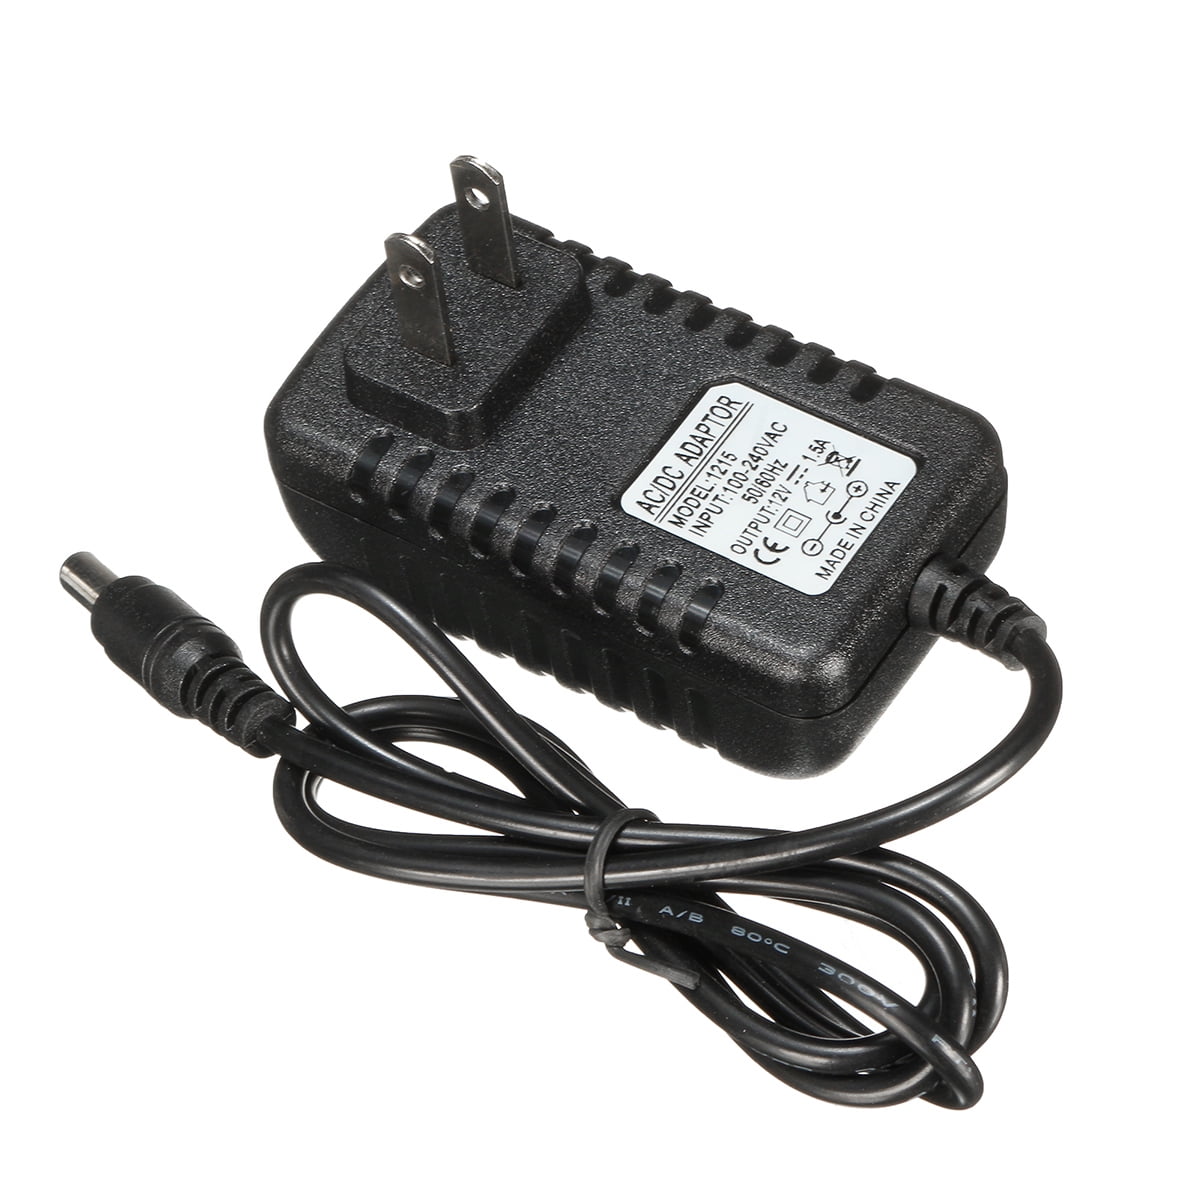 NEW 6v 500mA Ride on AC Power Supply Battery Charger for Cars Jeeps Trikes Mini 